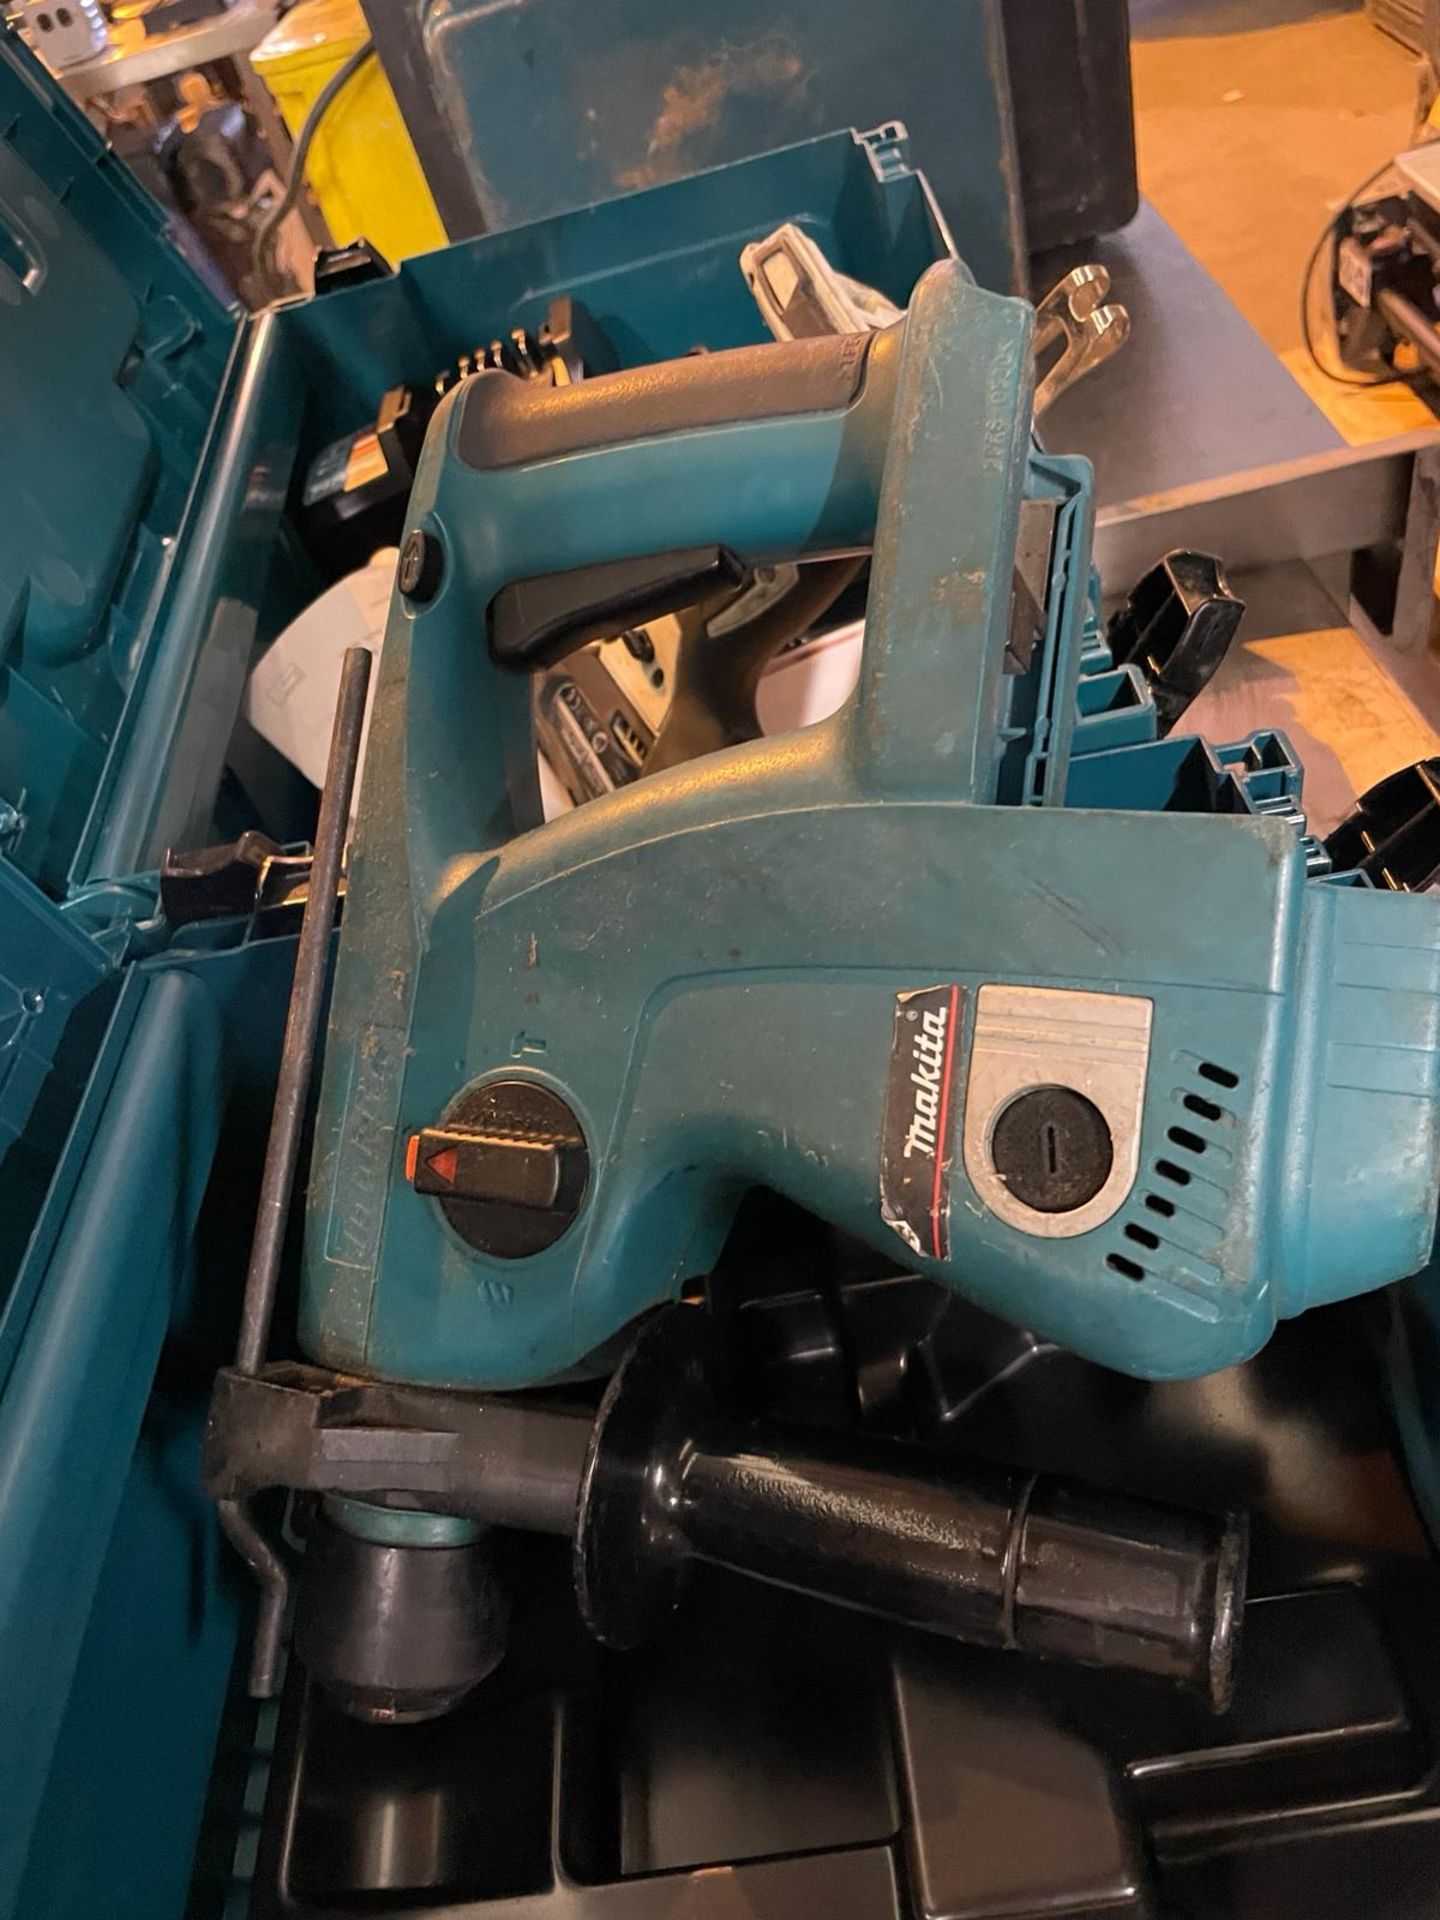 1 x Makita BHR200 110v Cordless Rotary Hammer Drill With Case - Image 3 of 7